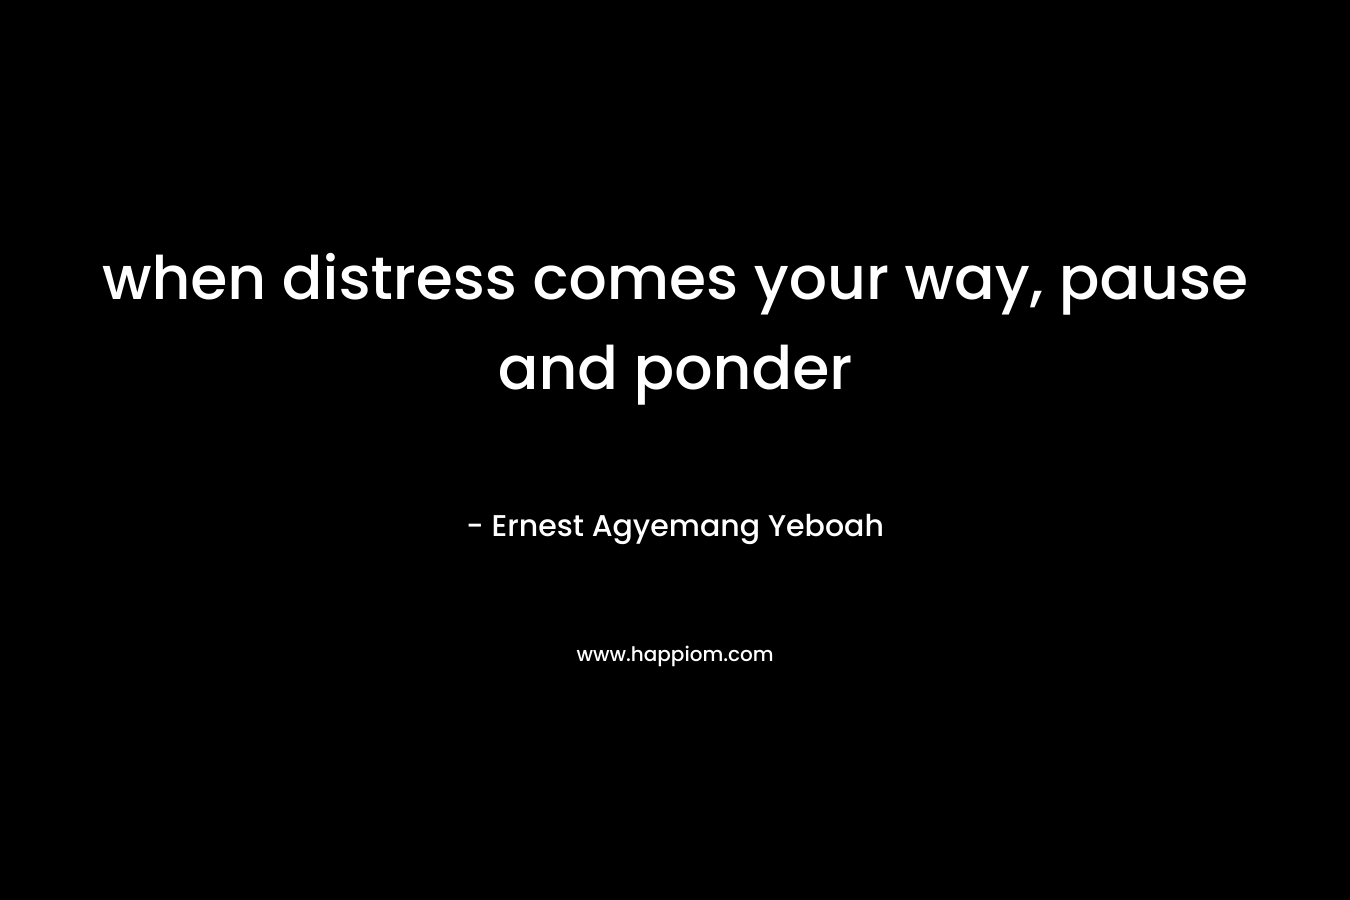 when distress comes your way, pause and ponder